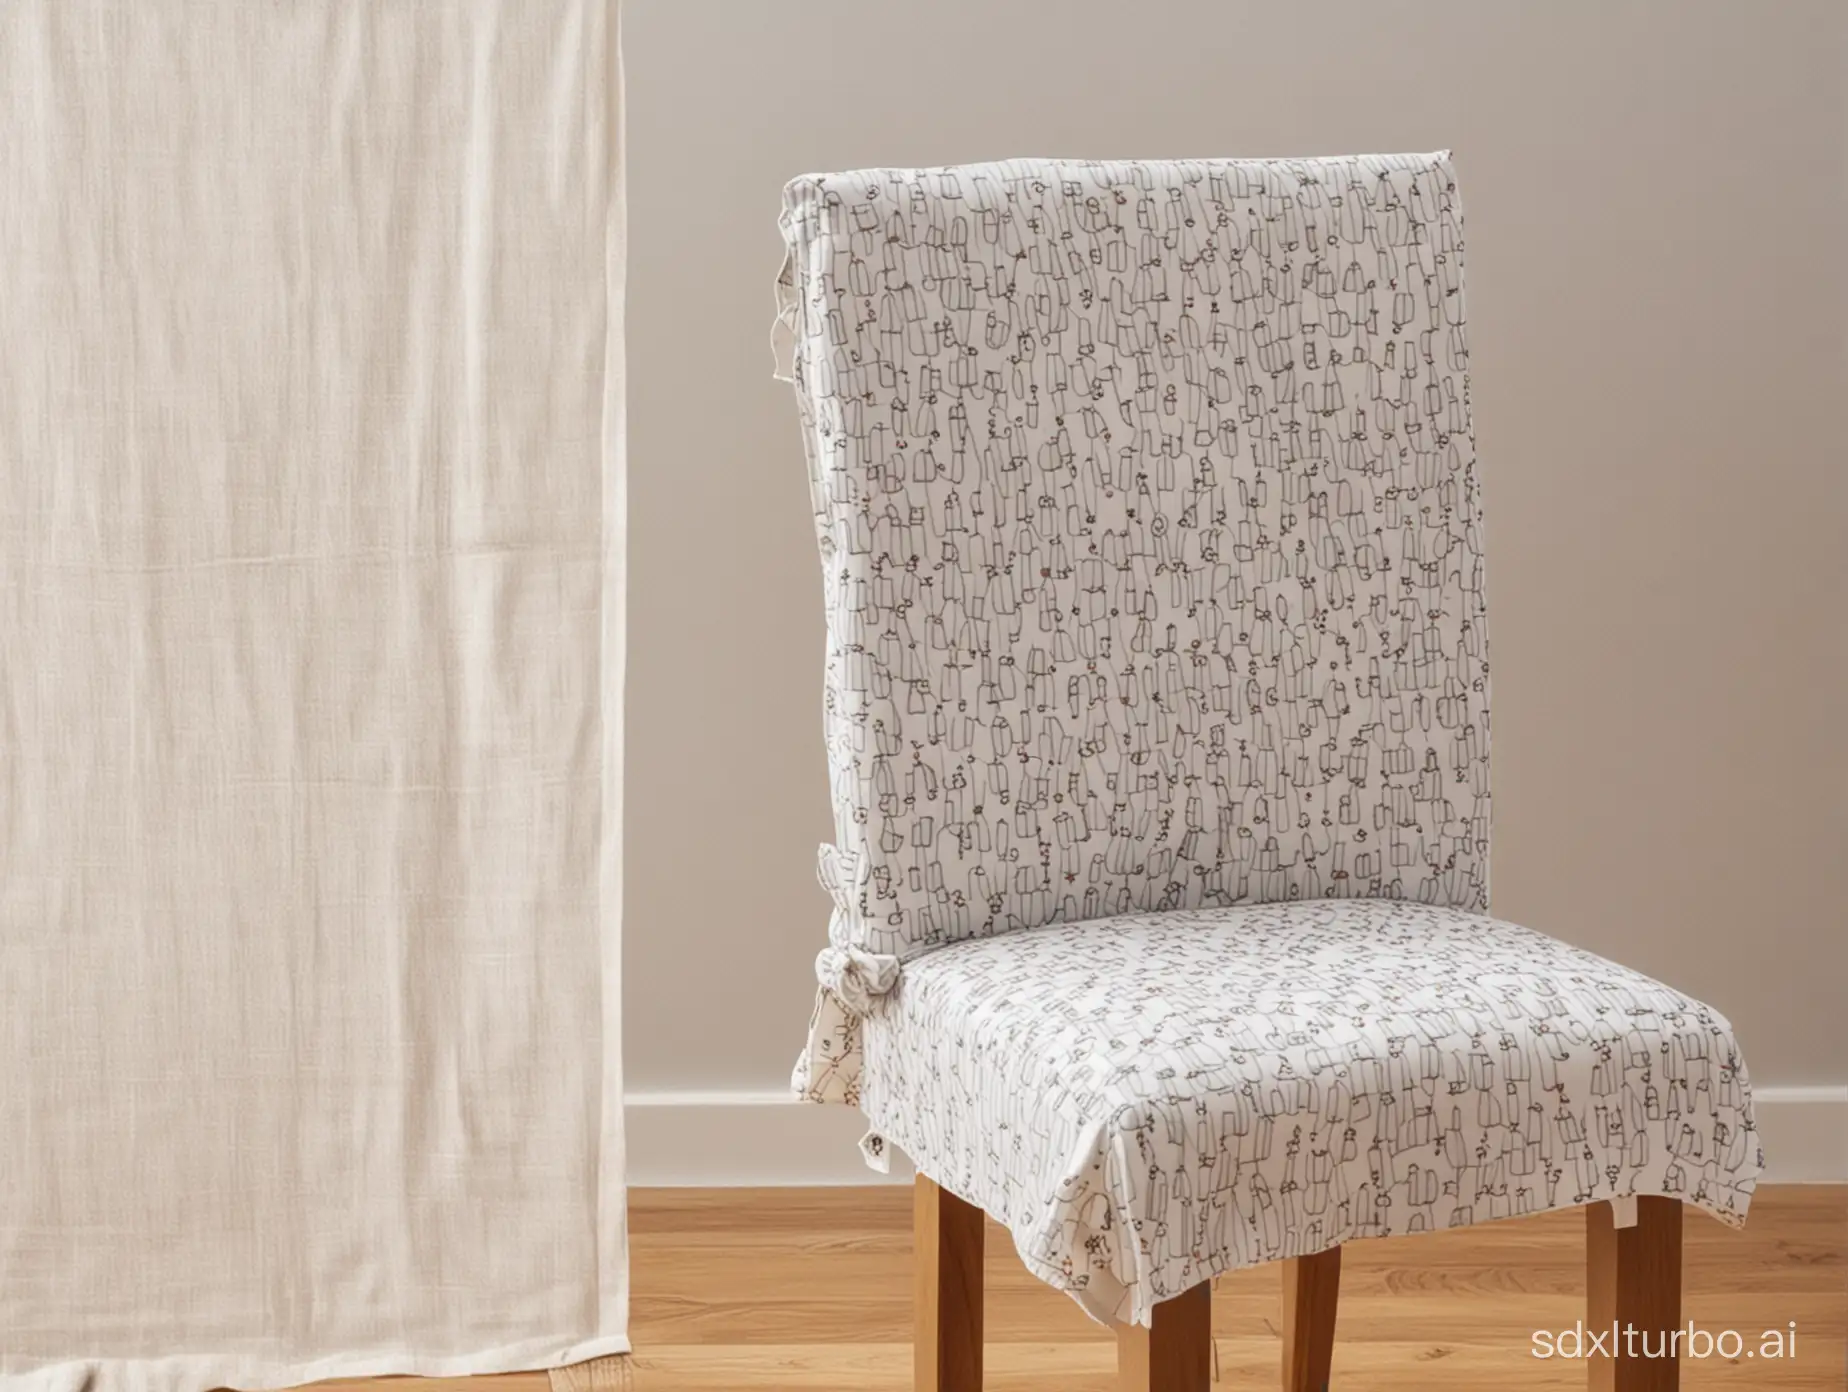 DIY-Sewing-Pattern-for-Chair-Cover-05m-x-2m-StepbyStep-Guide